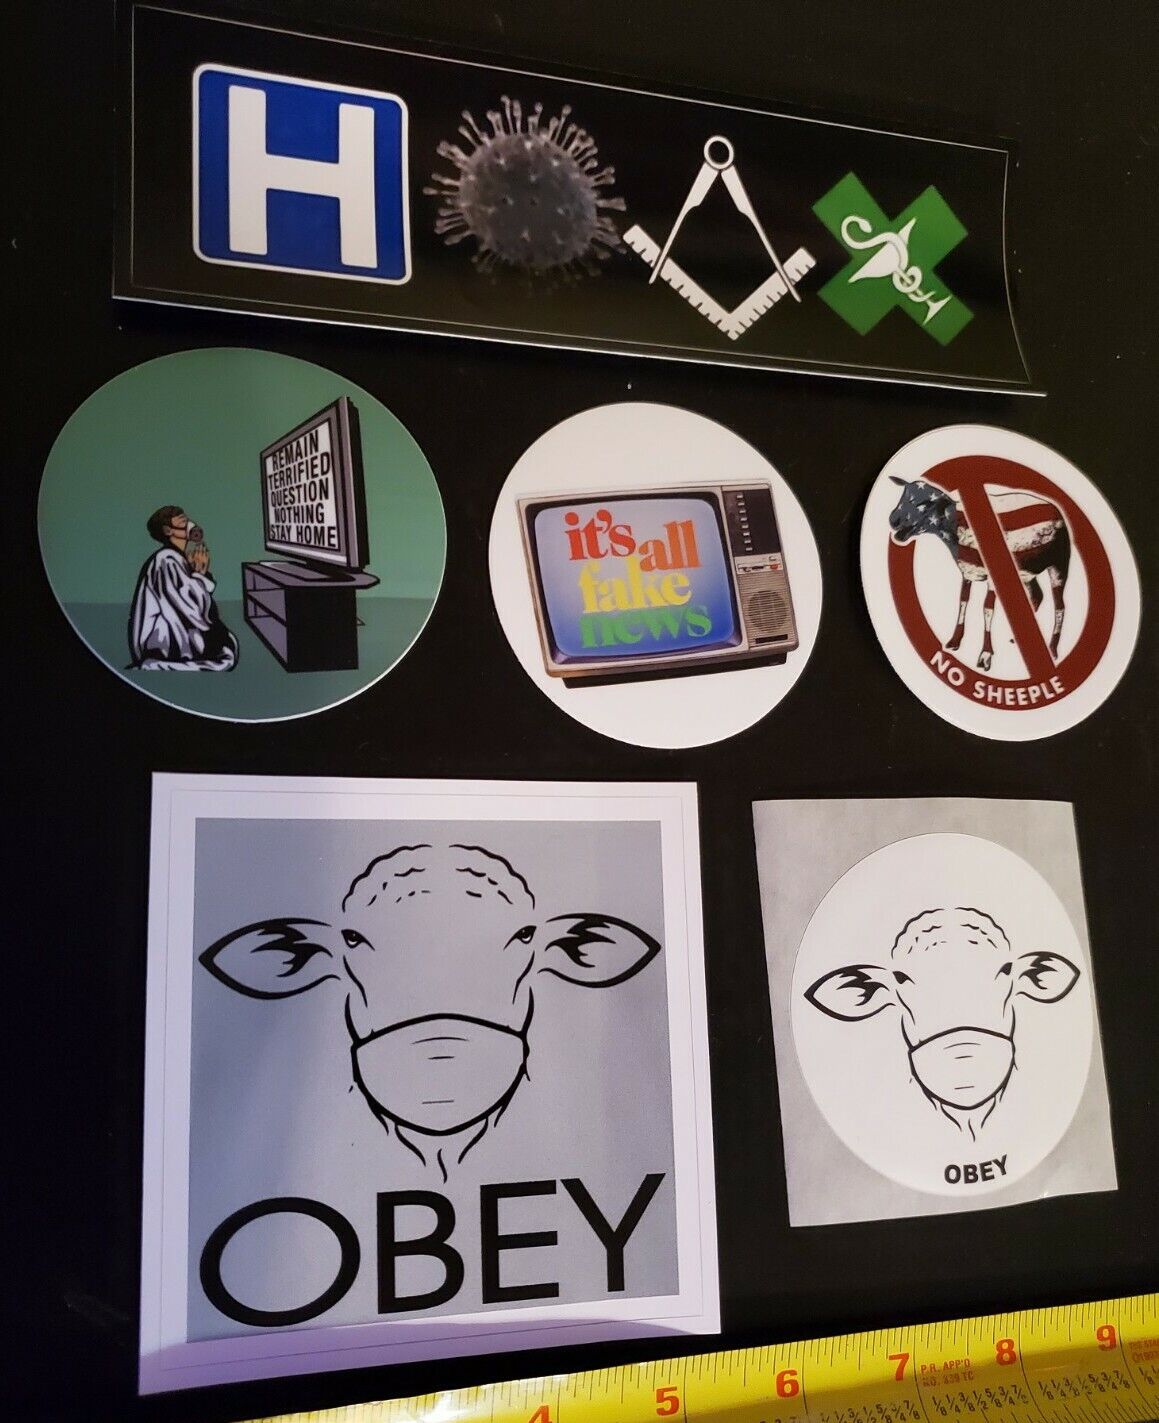 HOAX 2020 GOV-DID FRAUD SHEEPLE Bumper Stickers Lot of 6 GREAT RESET FAKE NEWS 